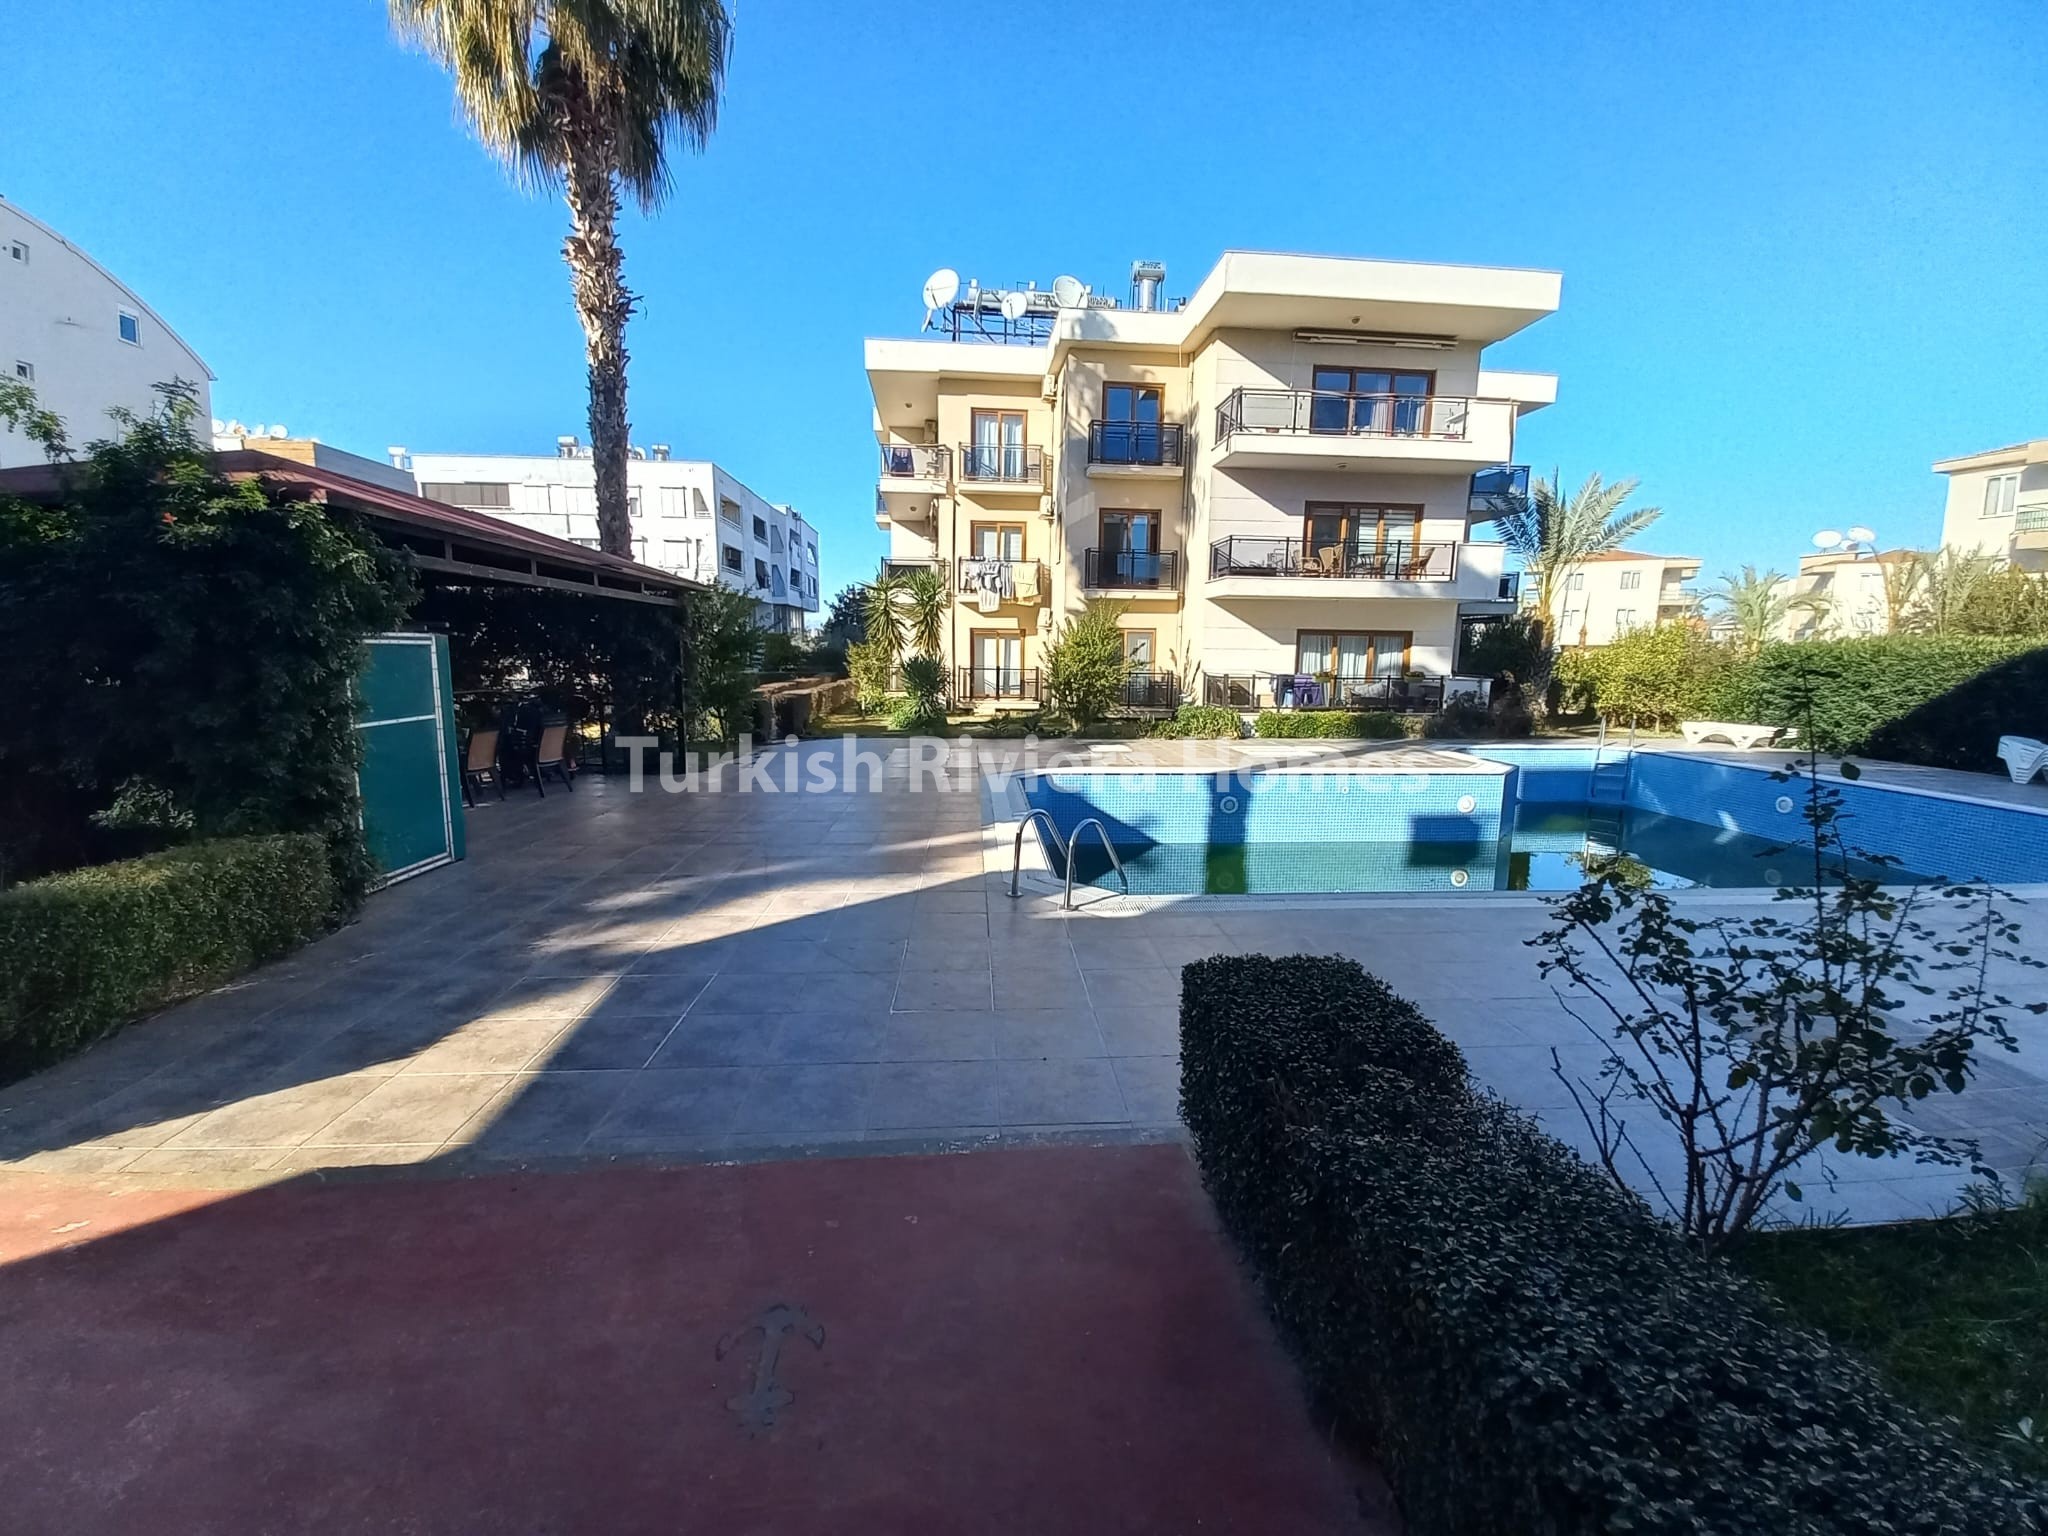 Bargain Price Two Bedroom Fully Furnished Apartment for Sale in Belek